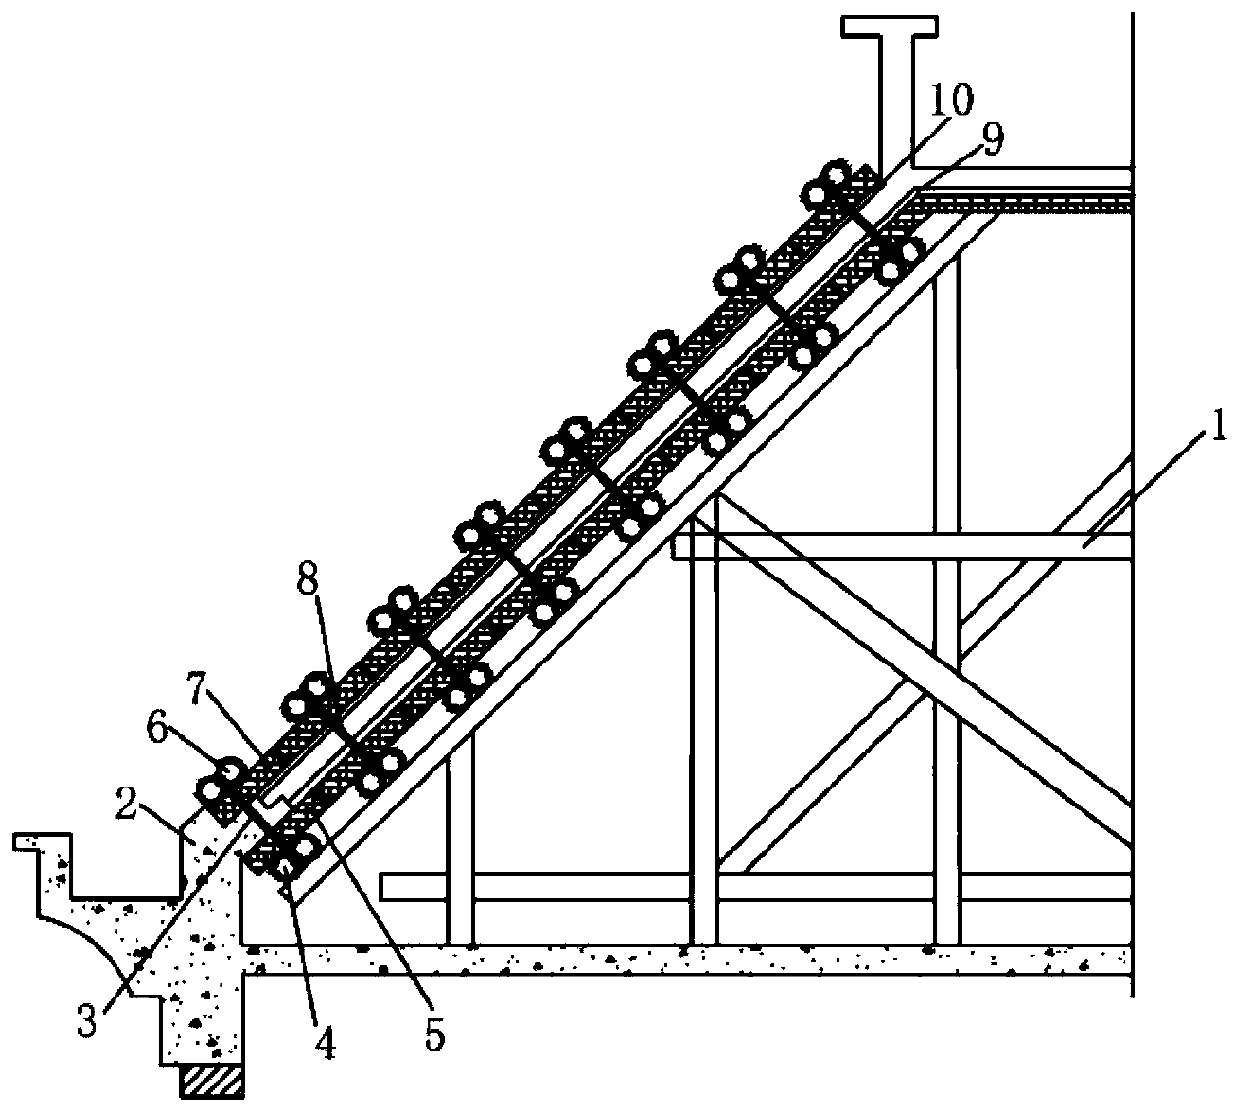 Construction method of sloping roof concrete structure